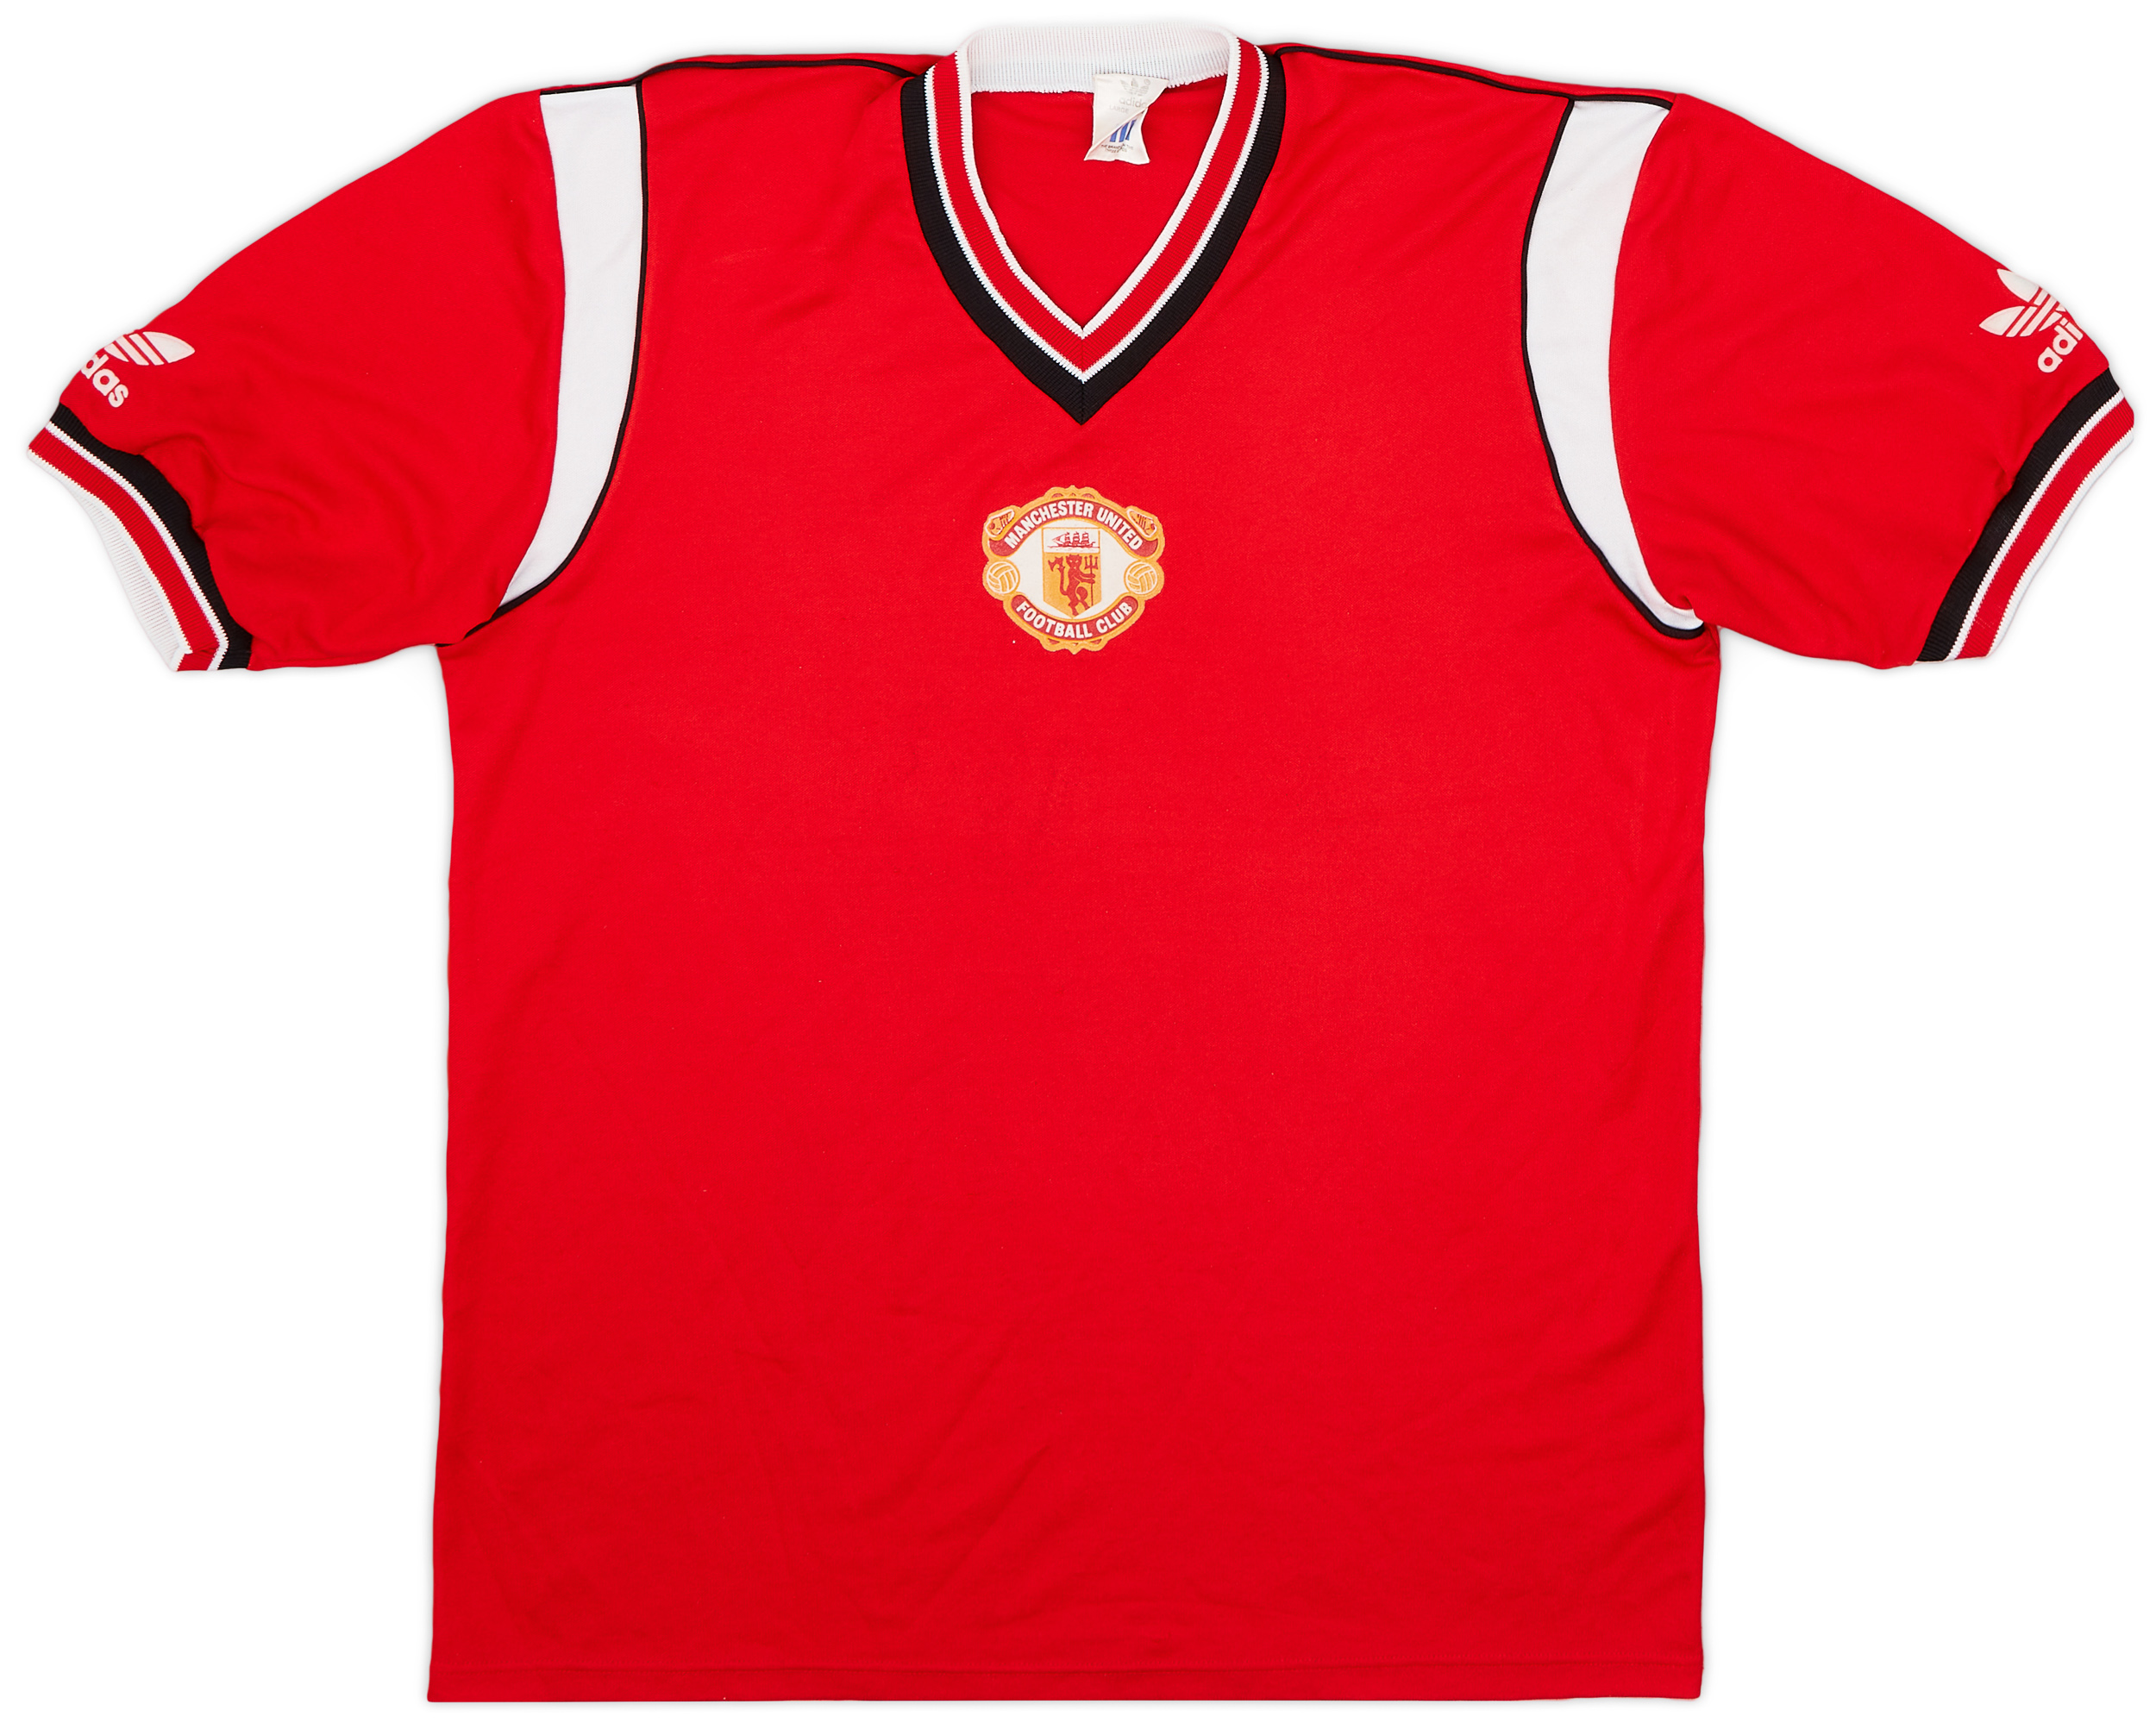 1984-86 Manchester United Home Shirt - 4/10 - ()